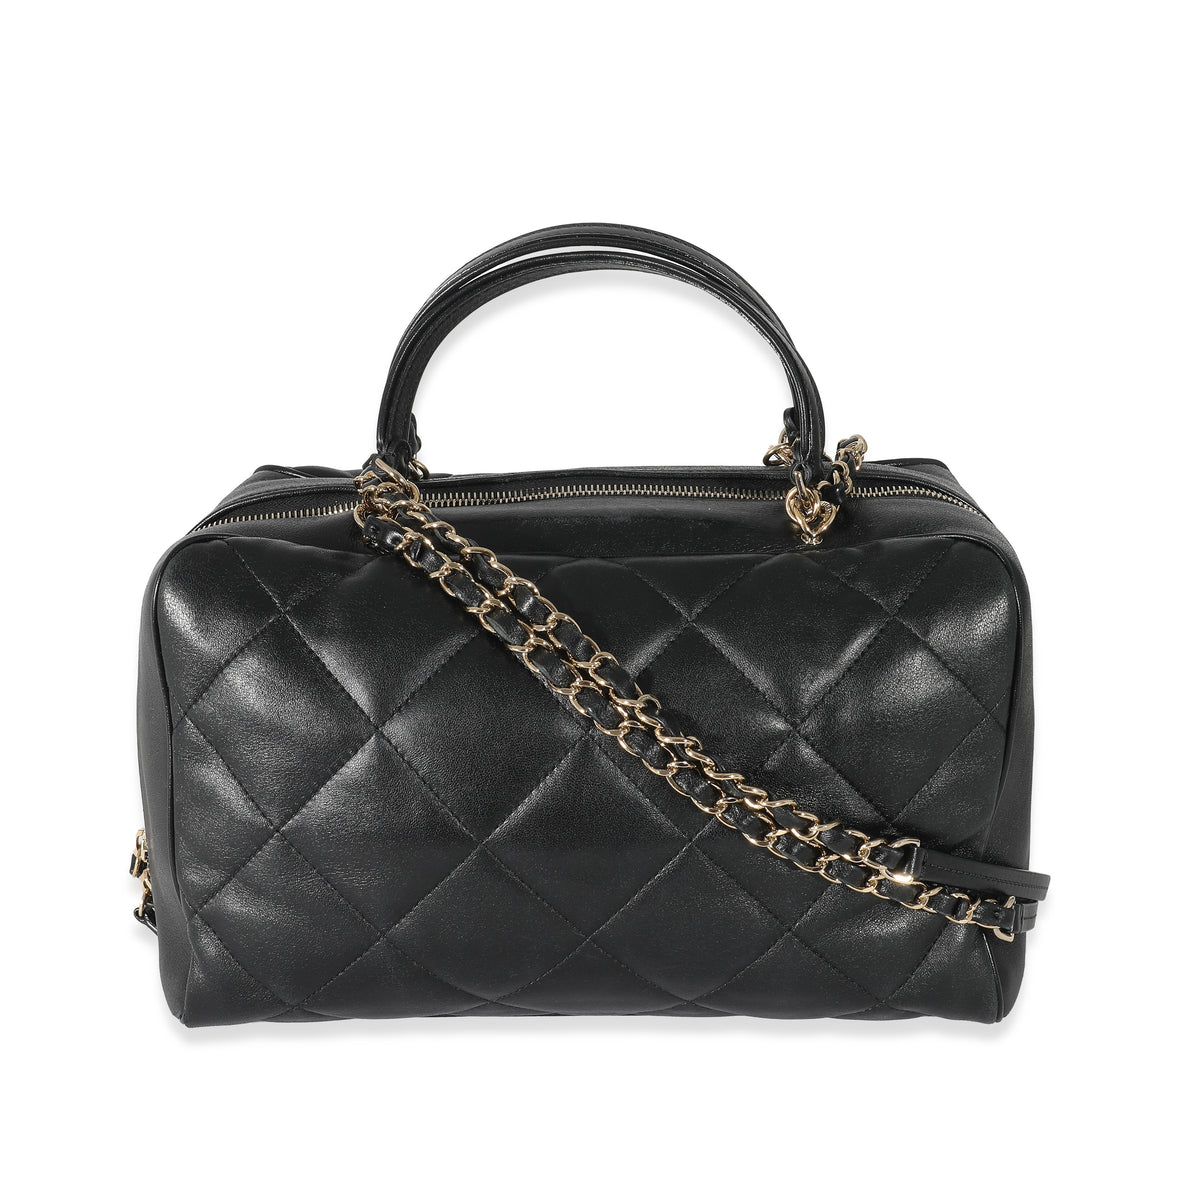 Chanel Black Quilted Lambskin CC Chain Zip Bowling Bag, myGemma